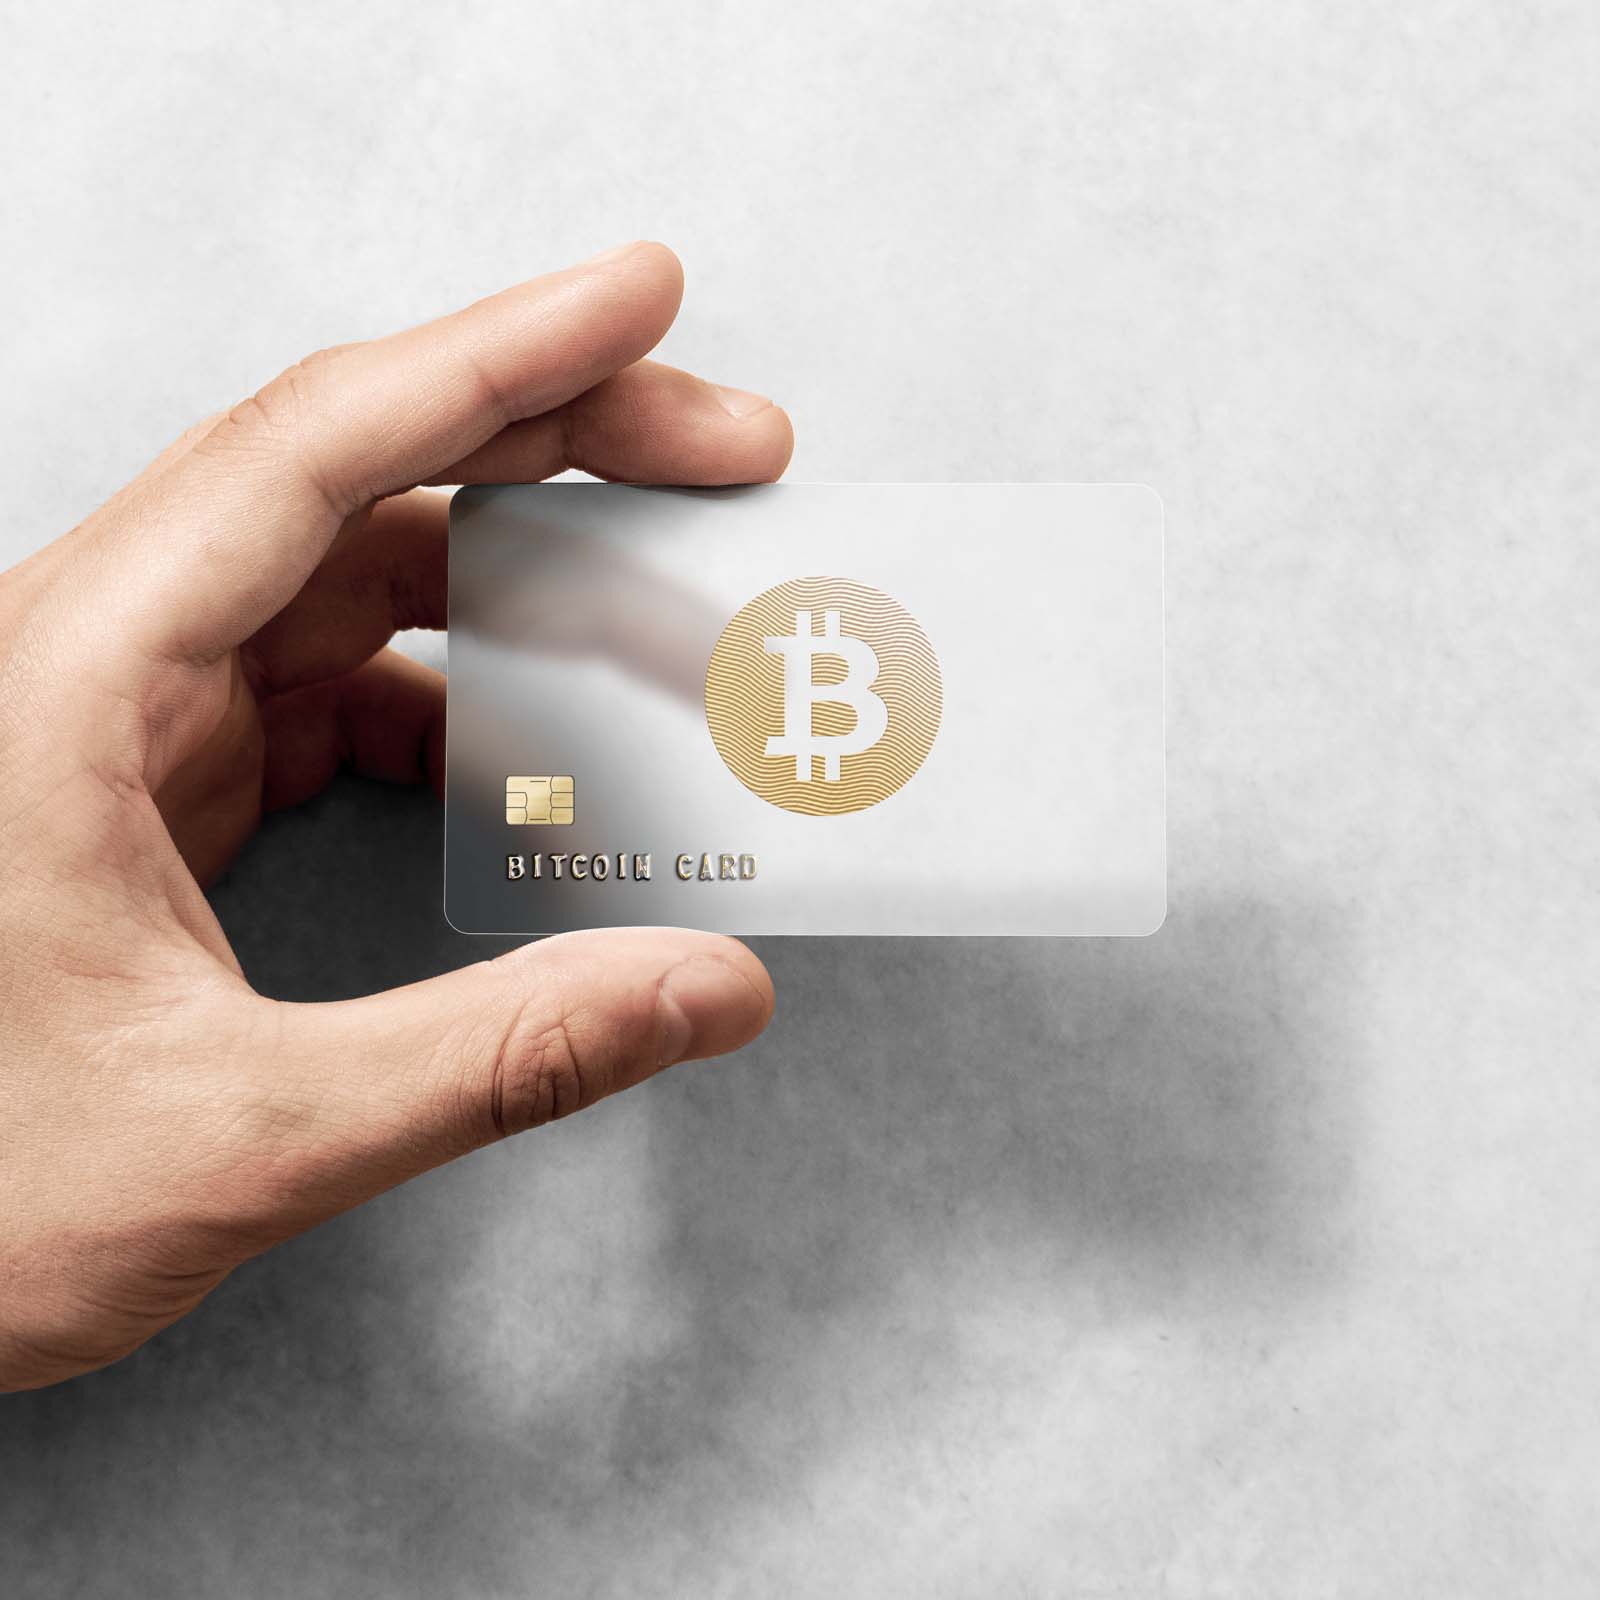 Bitcoins debit card crypto currency proof of work